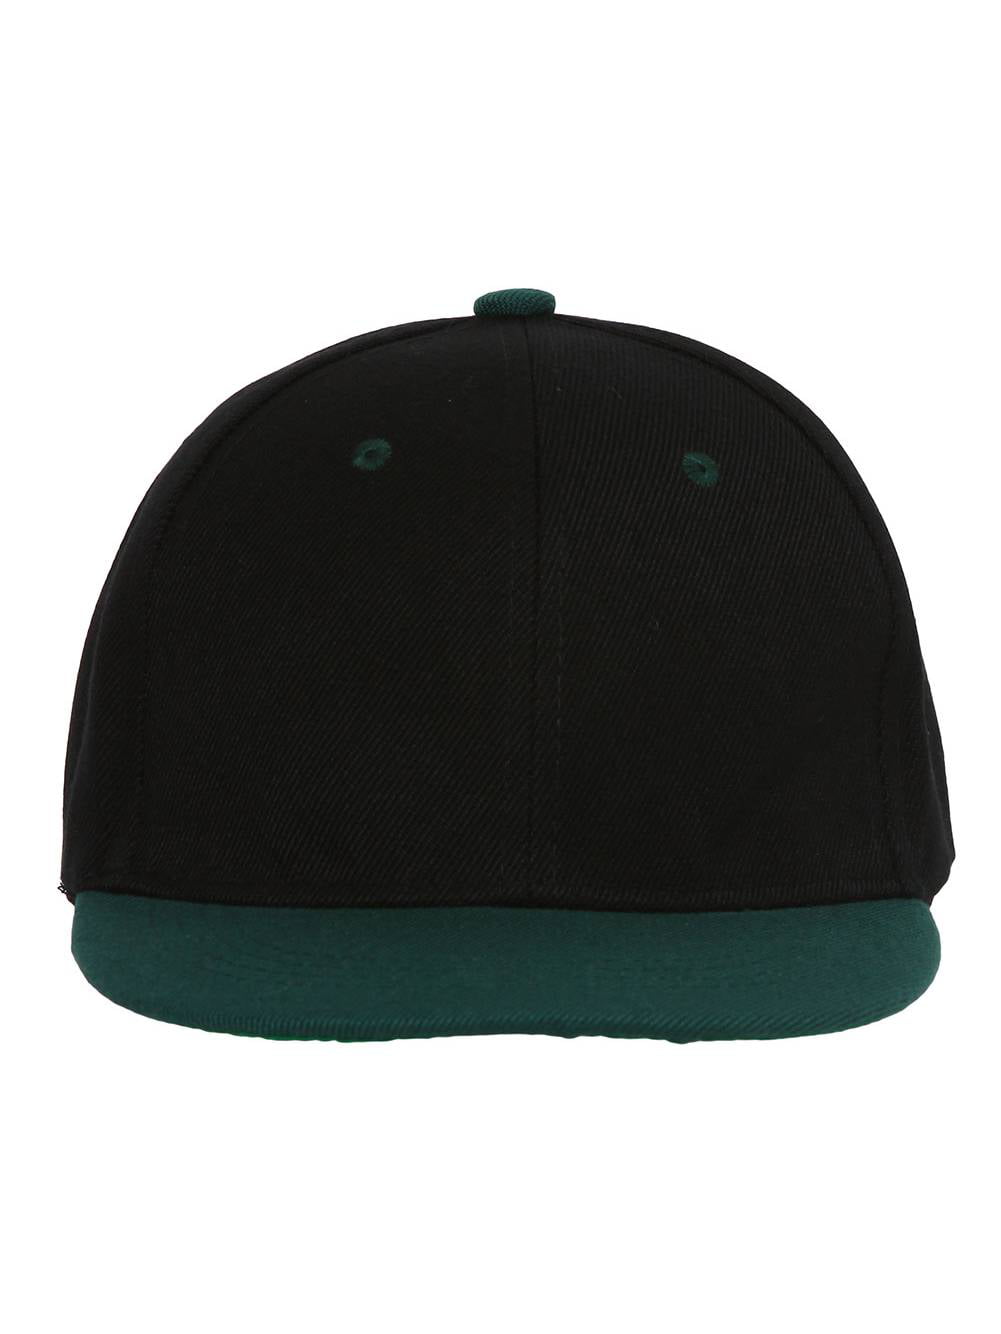 Youth Blank Two-Tone Snapback Hat 